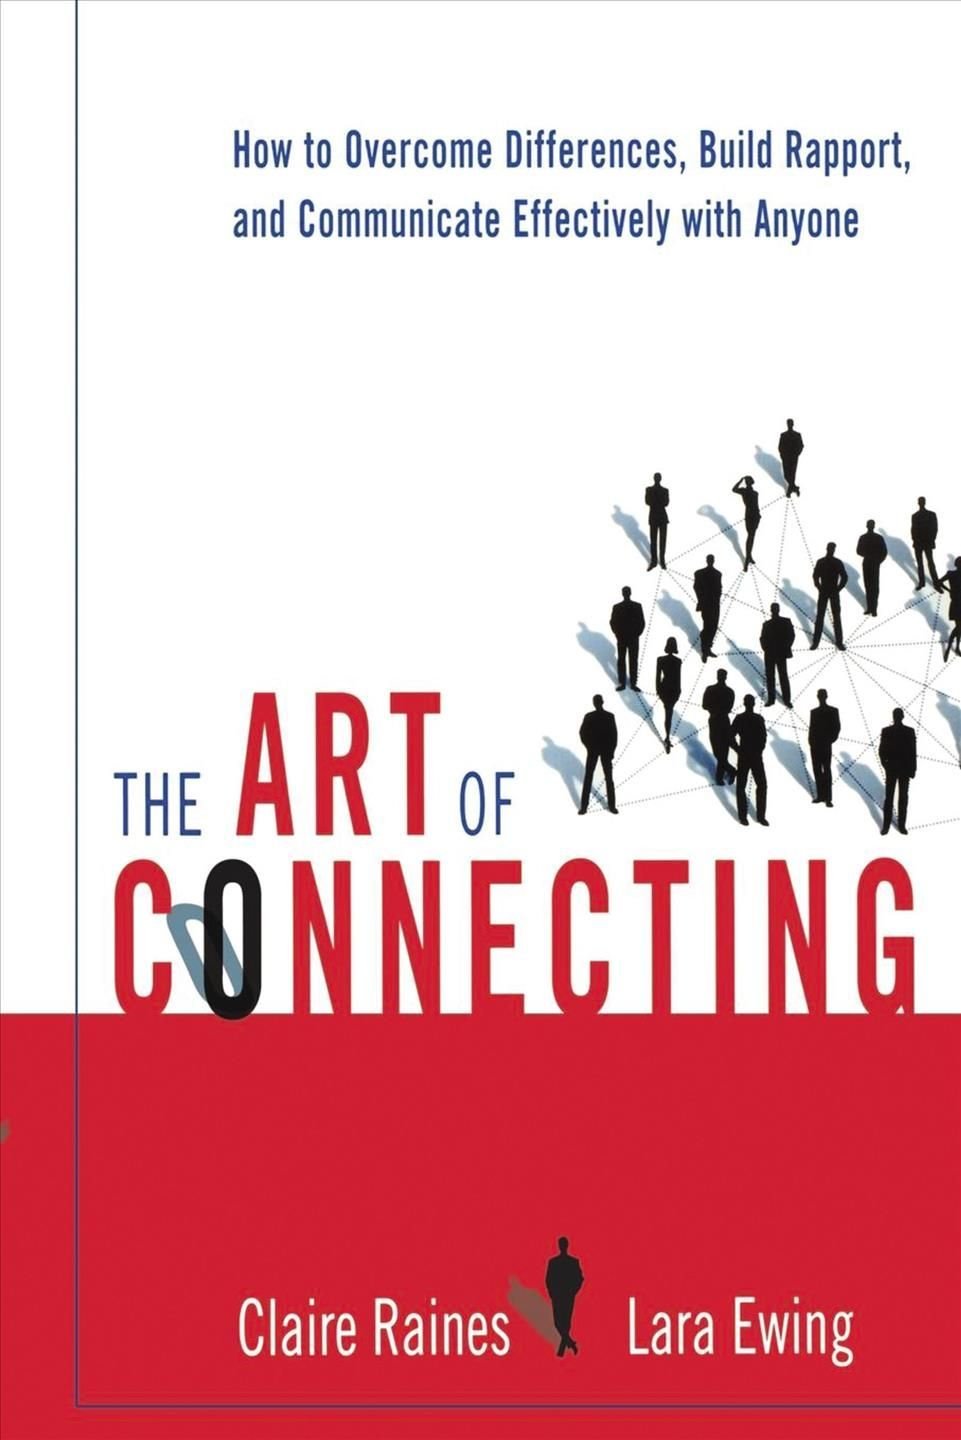 The Art of Connecting